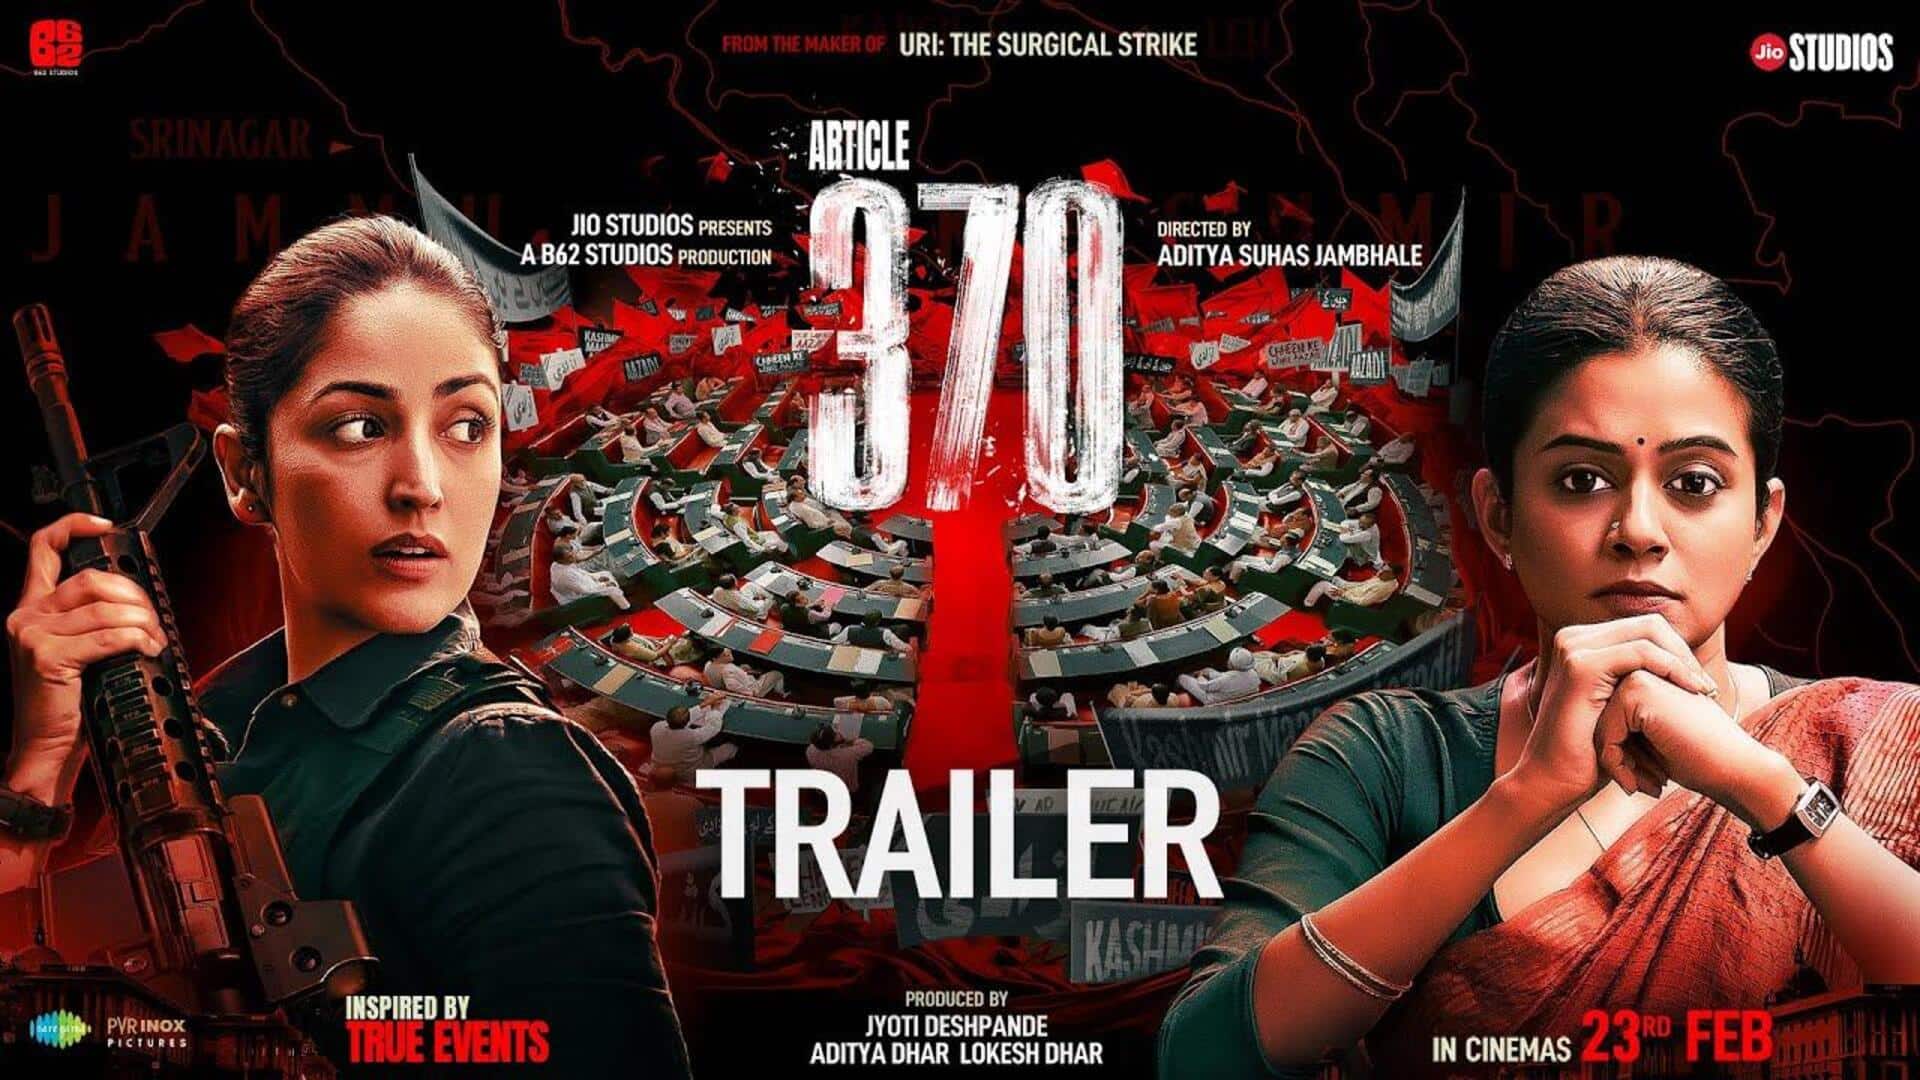 Box office collection: 'Article 370' is slow yet steady